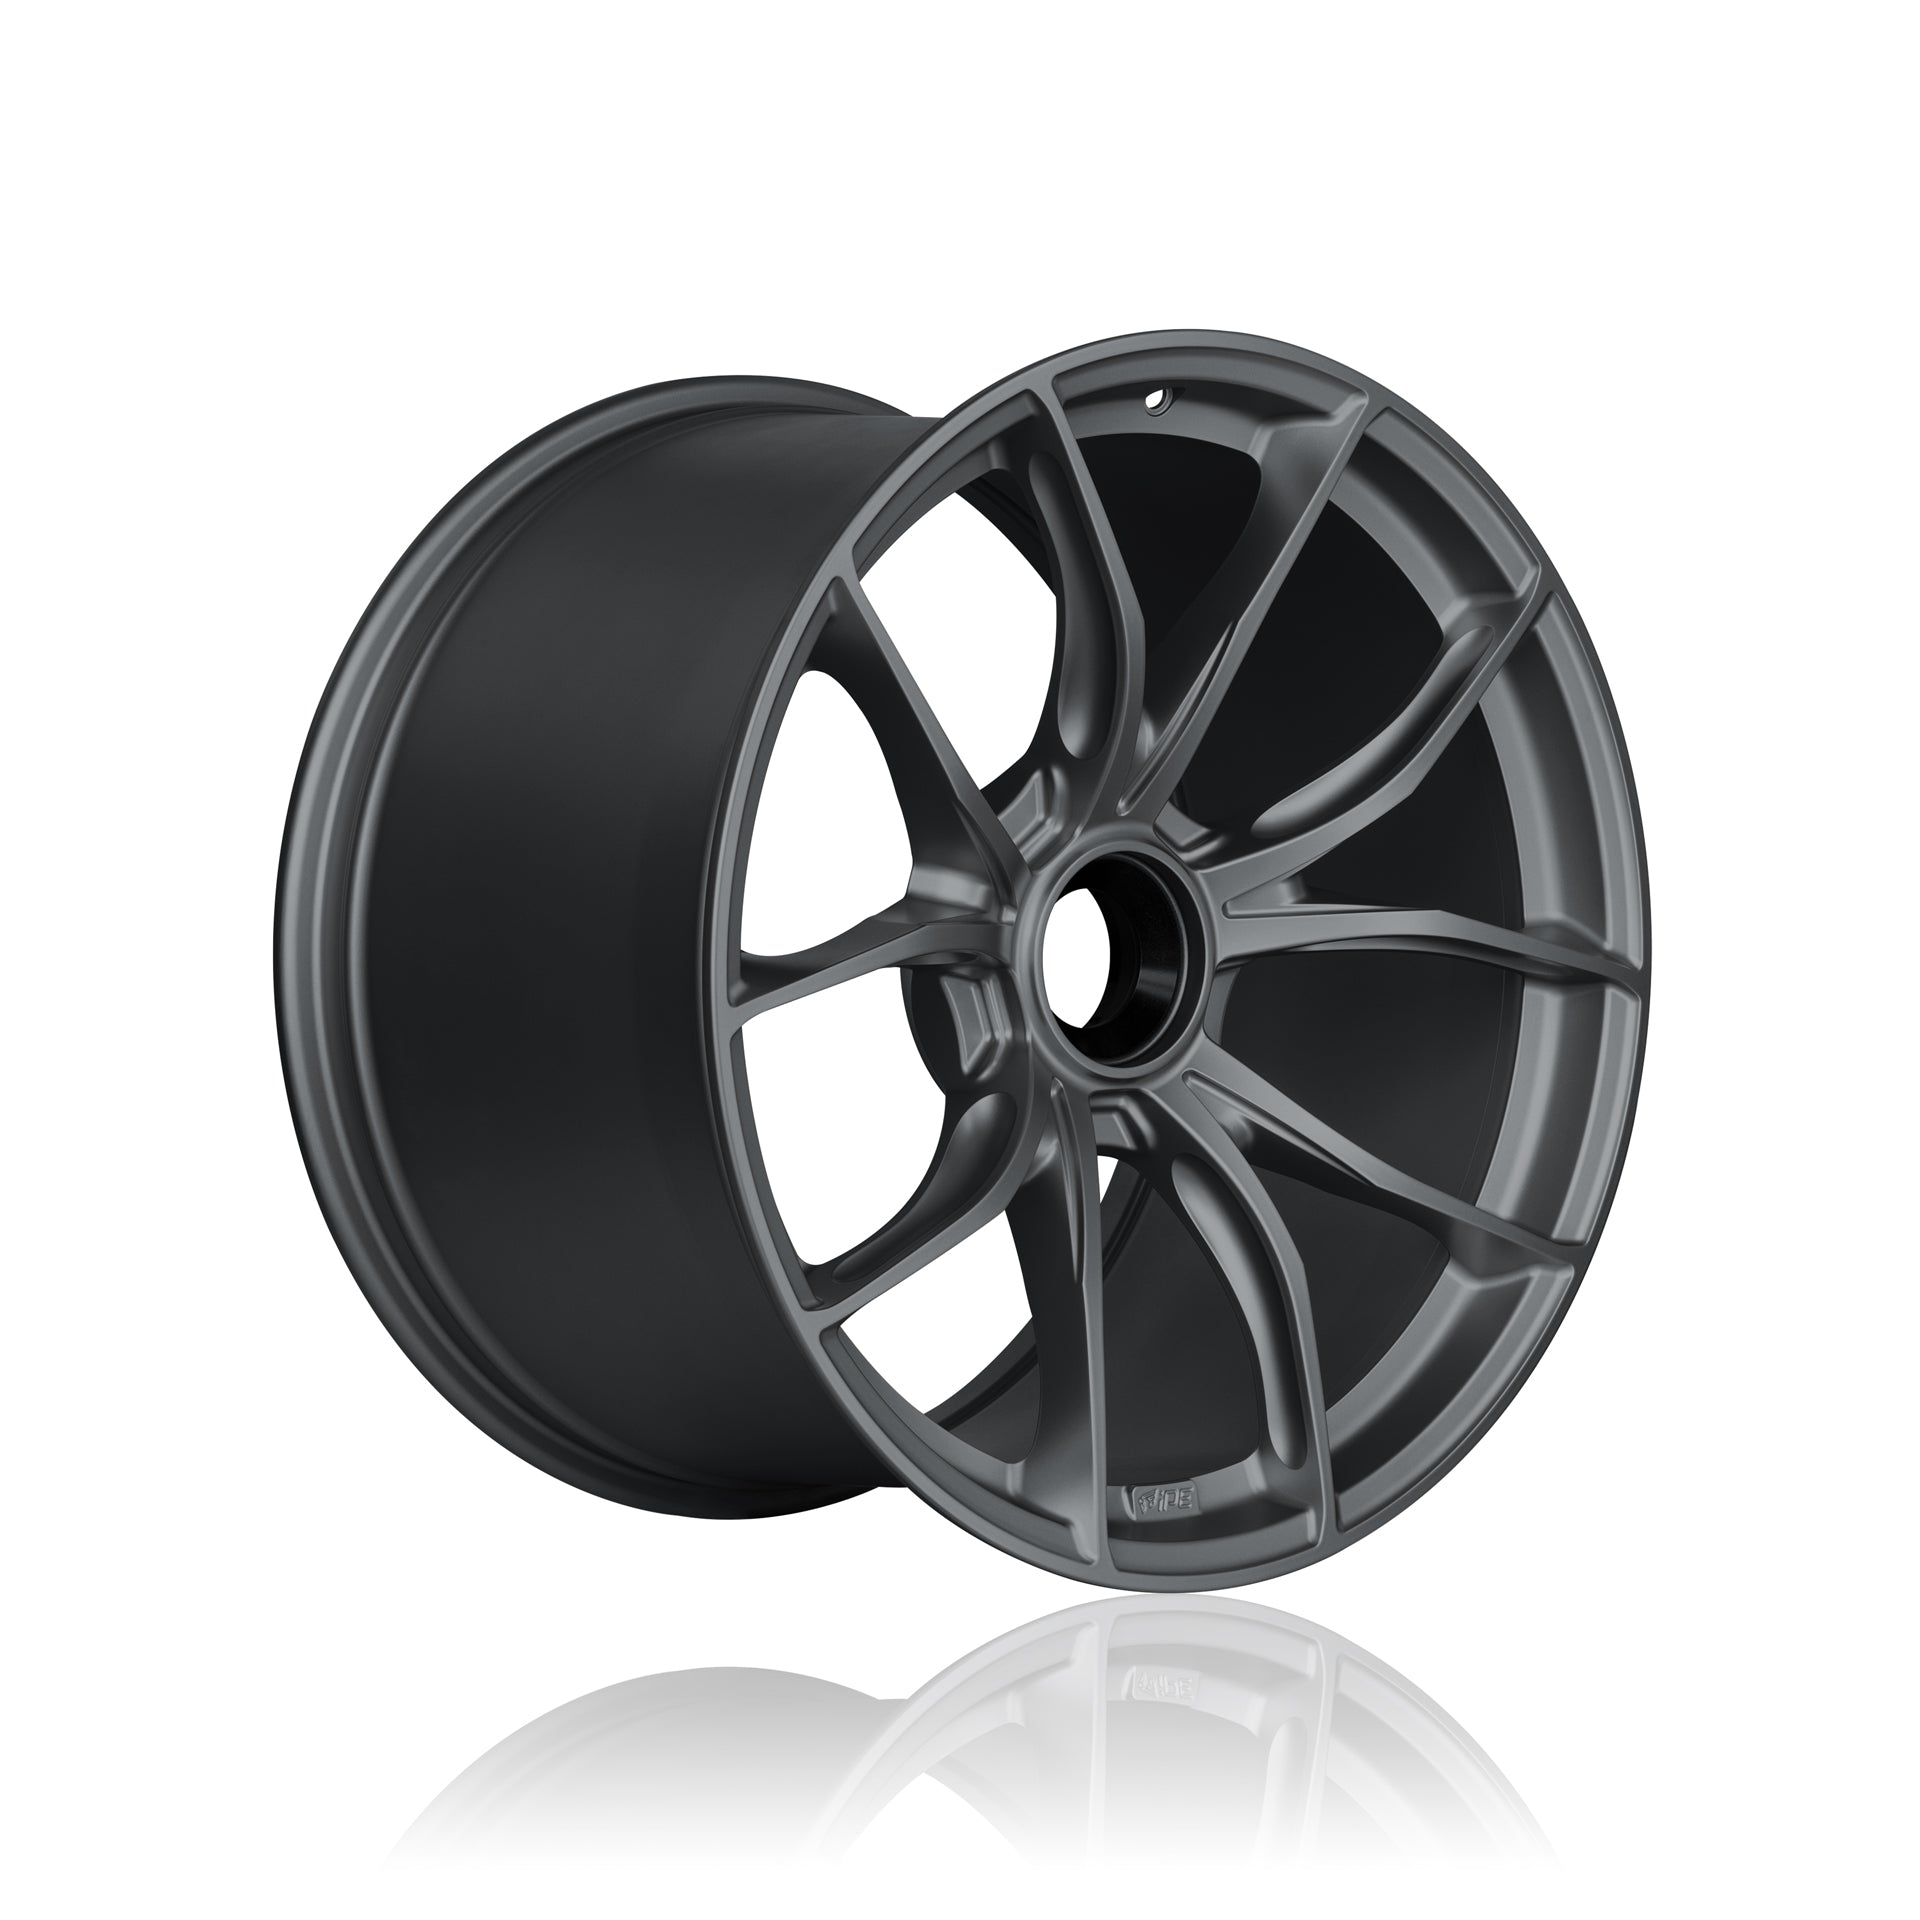 Offset front view of an anthracite IPE MFR-01 Magnesium wheel on a white background